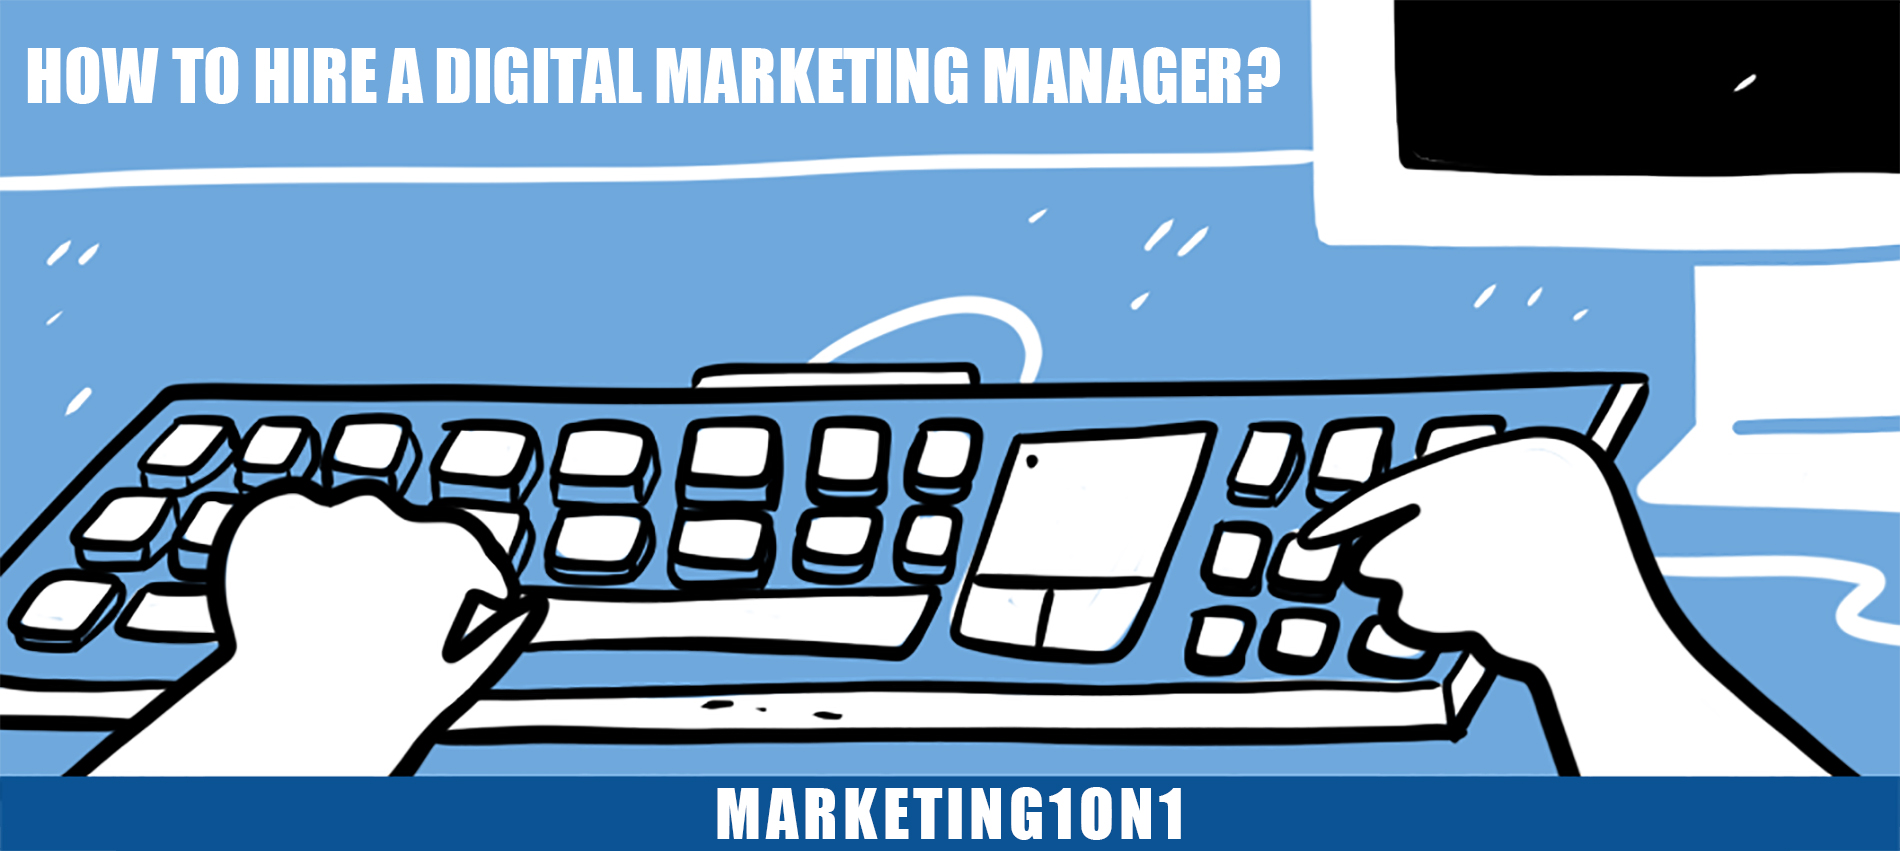 How to hire a digital marketing manager?